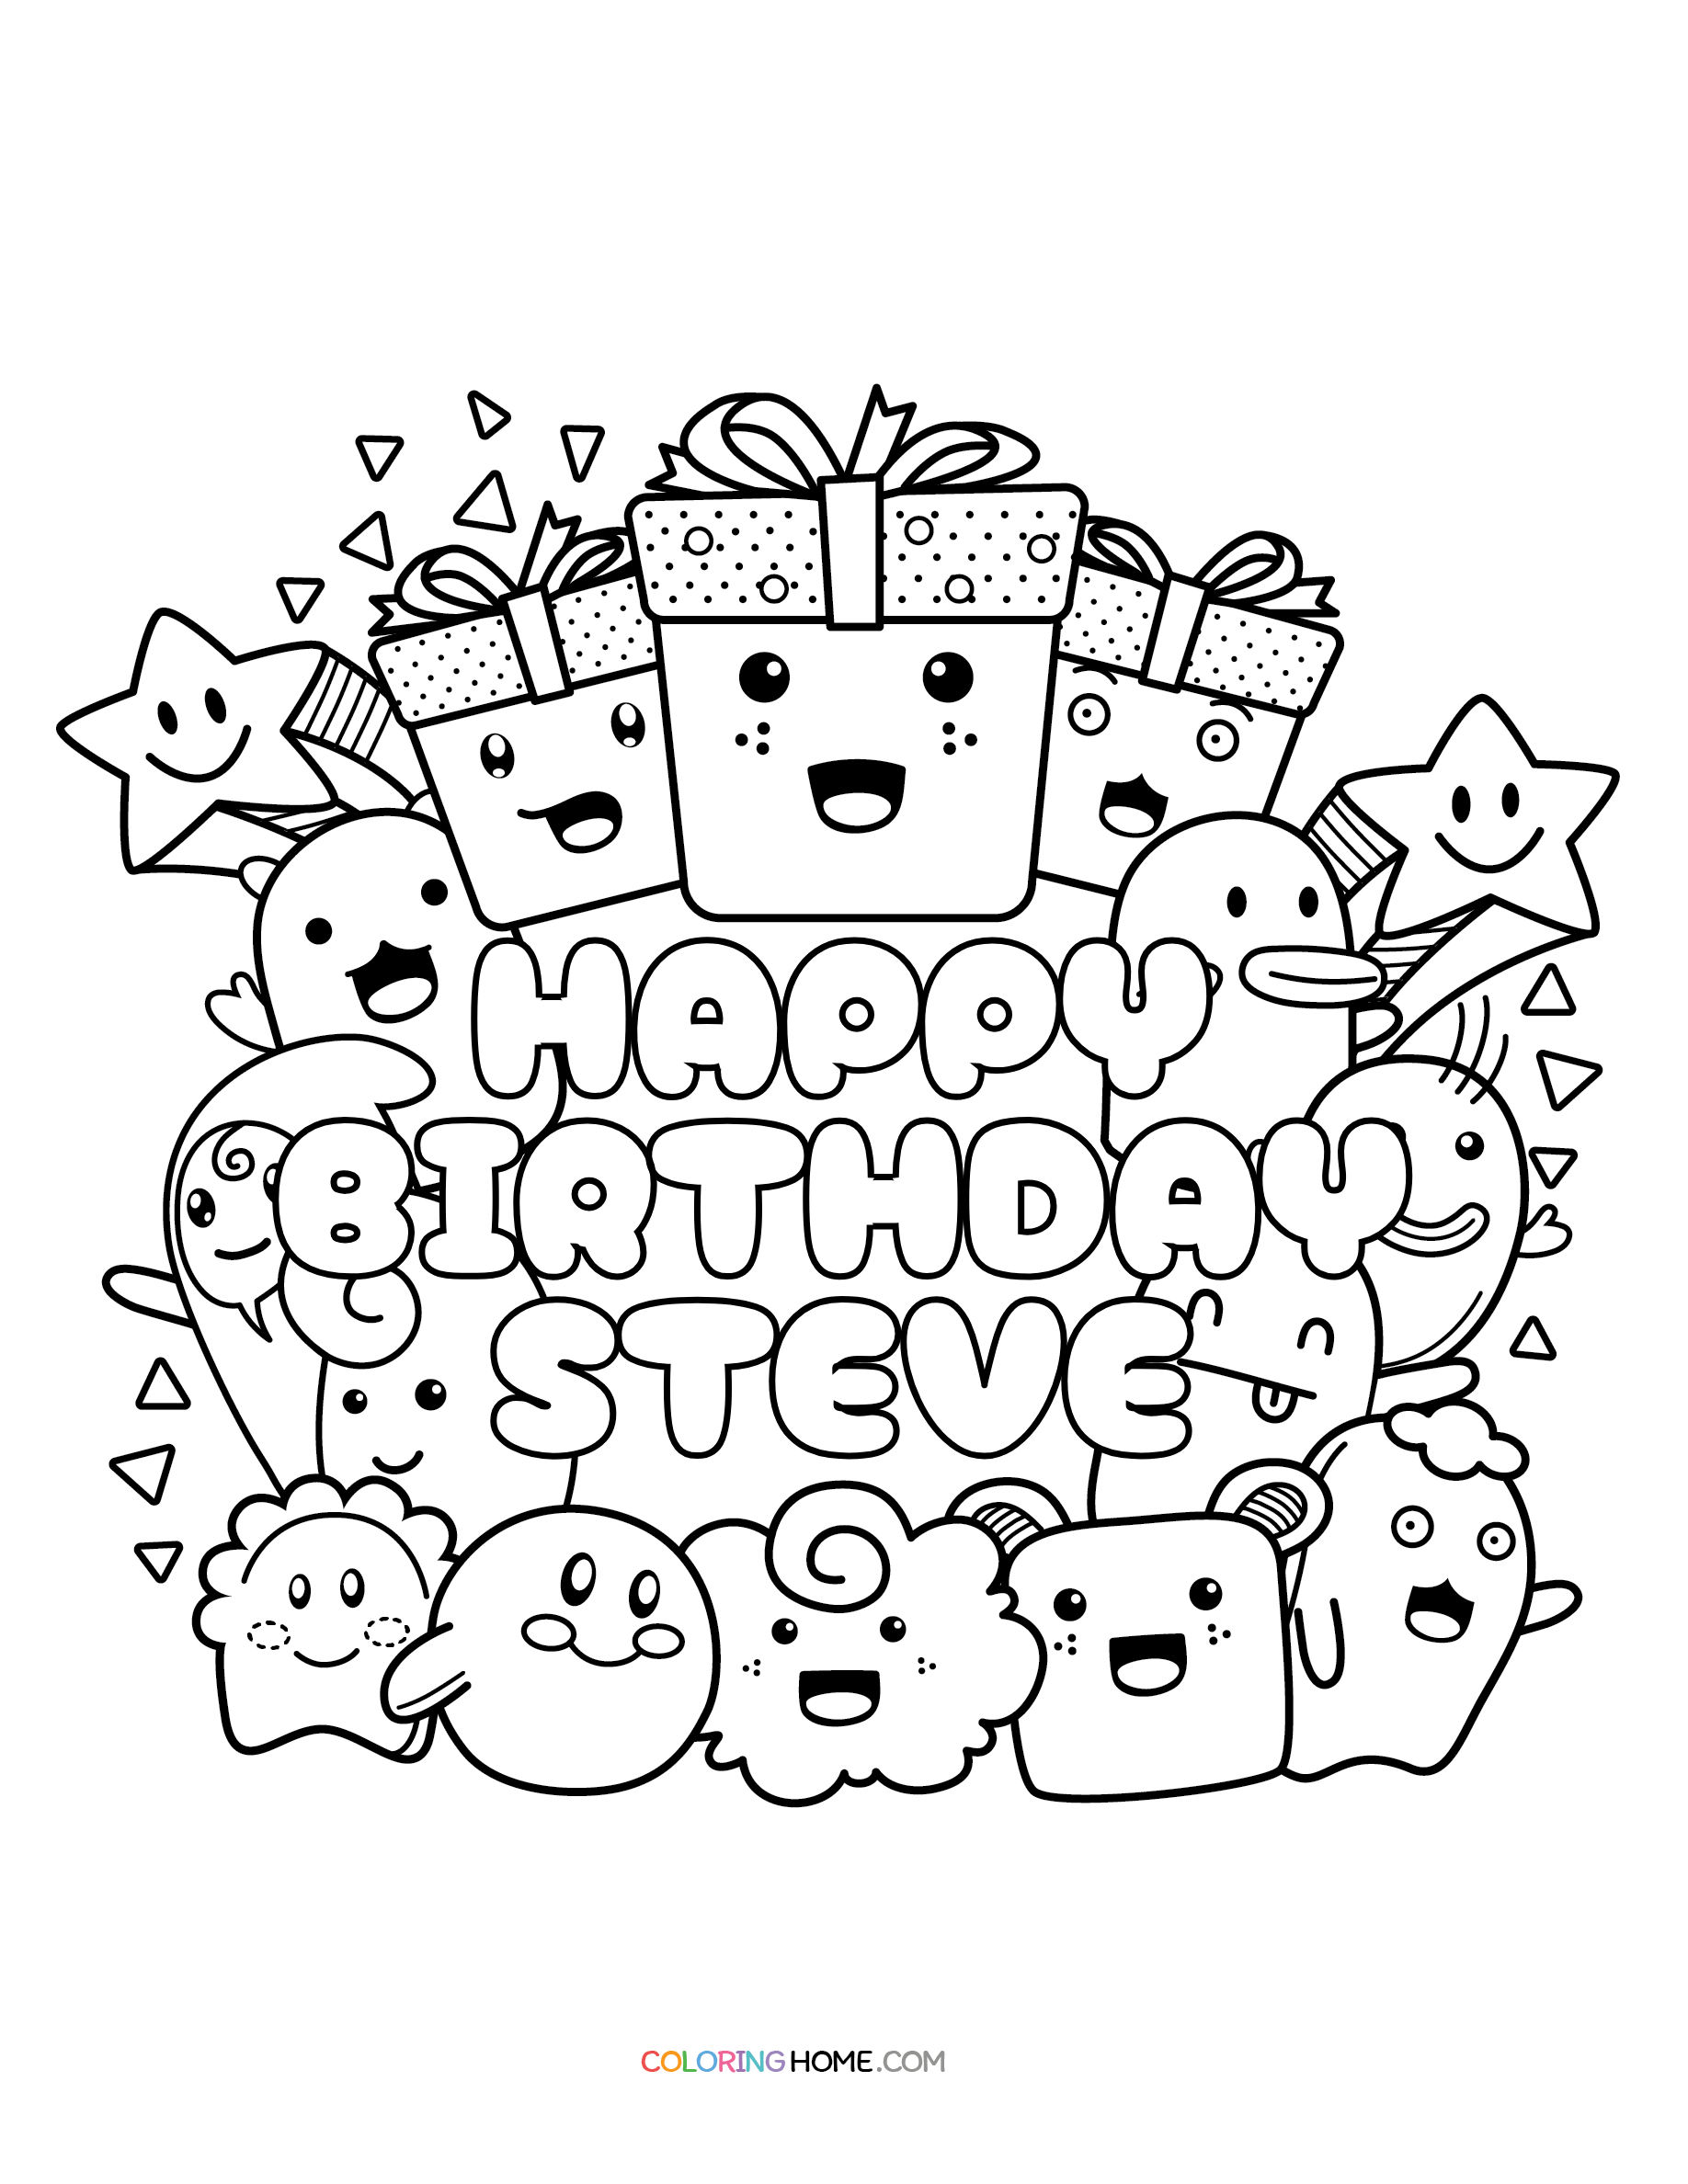 Happy Birthday Steve coloring page